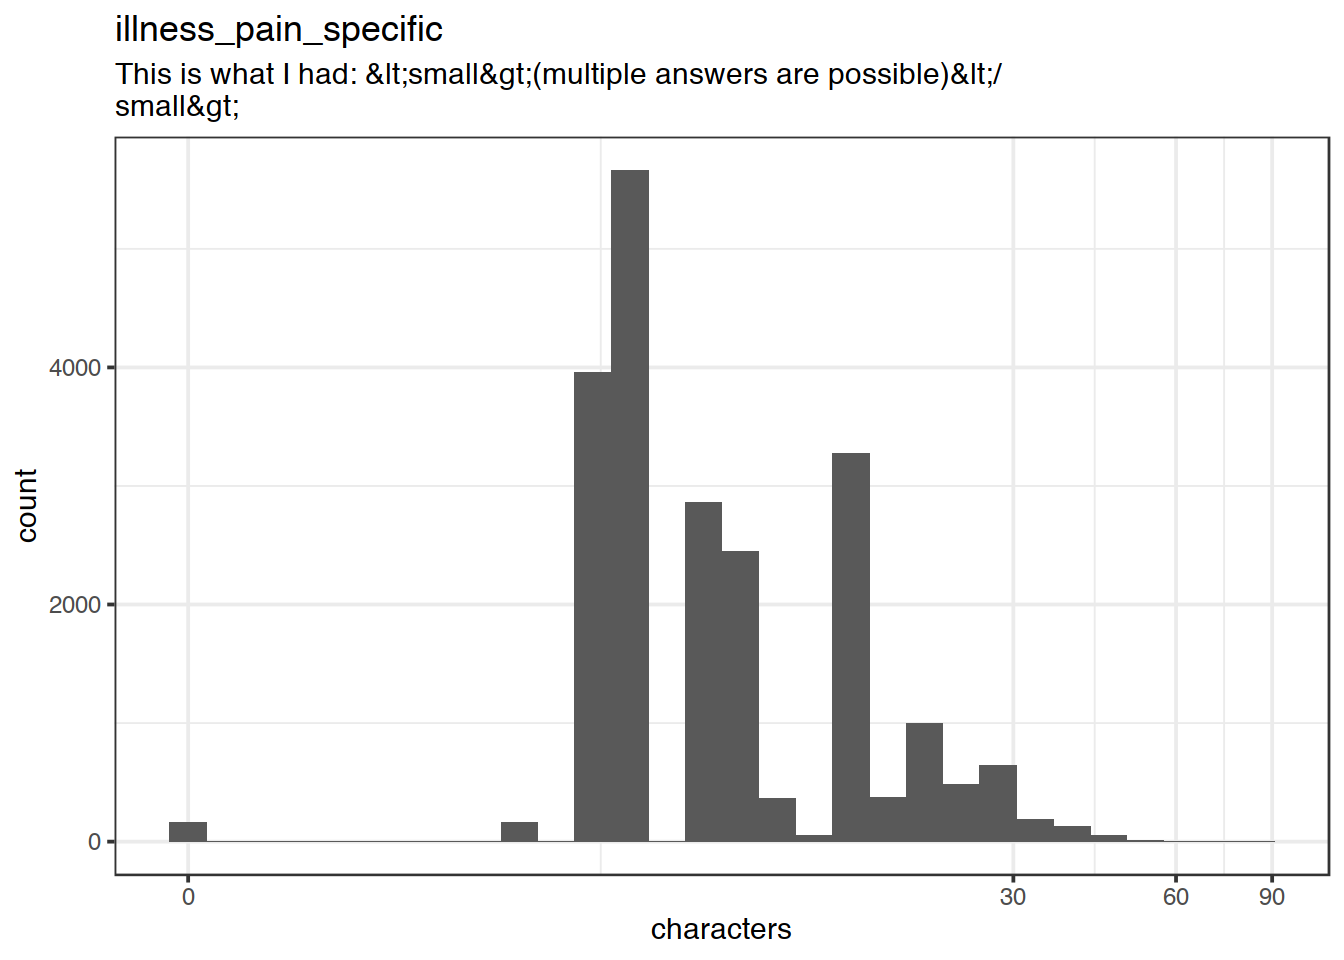 Distribution of values for illness_pain_specific